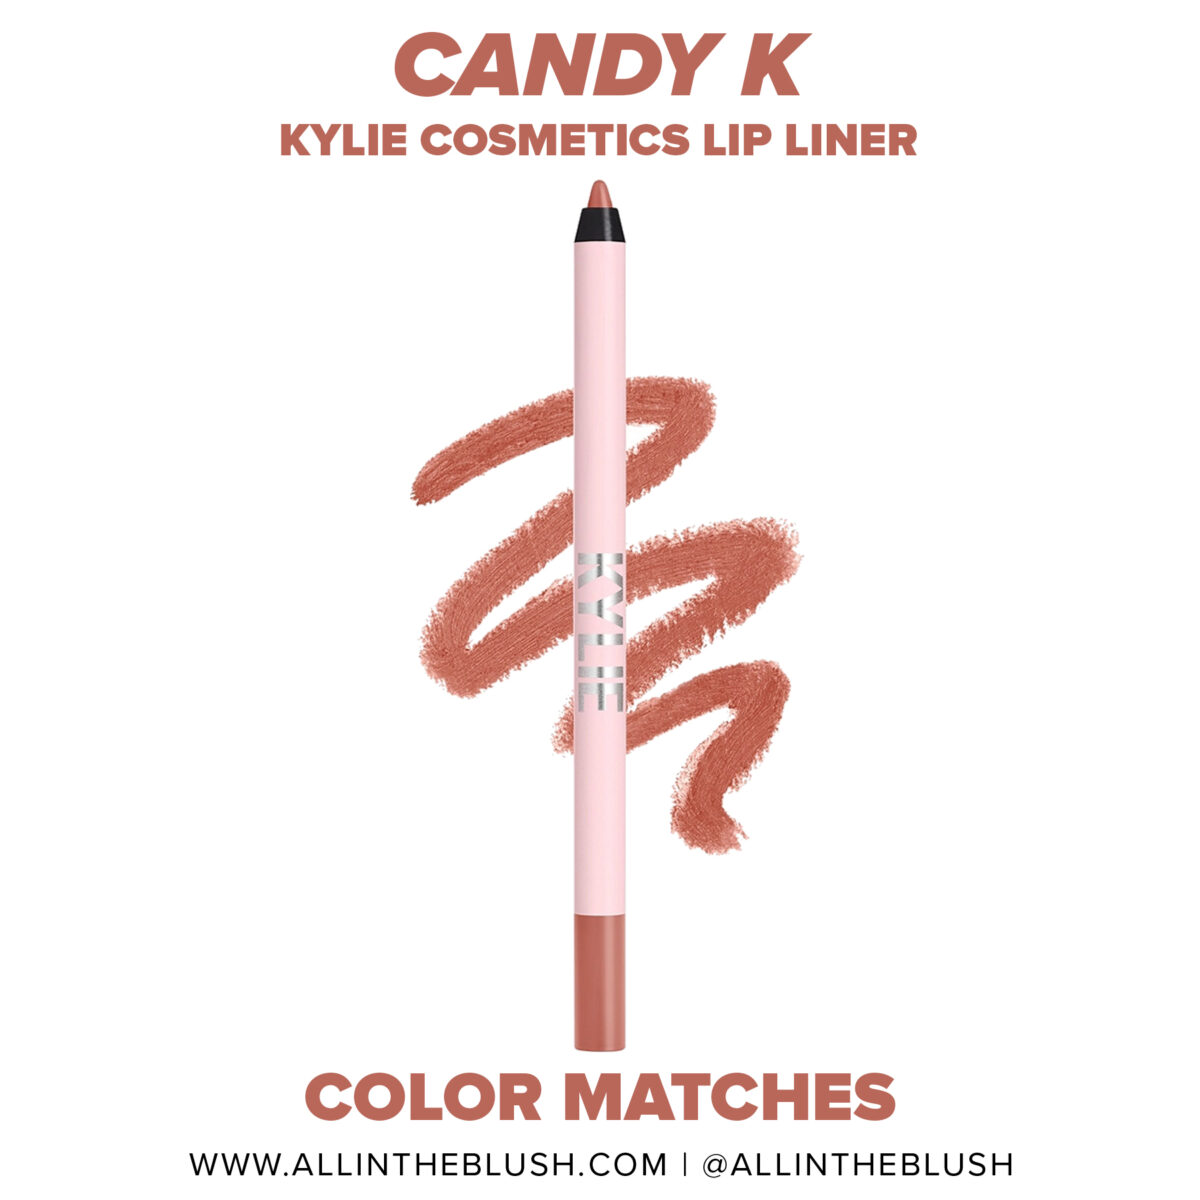 Kylie Cosmetics Candy K Lip Liner Dupes